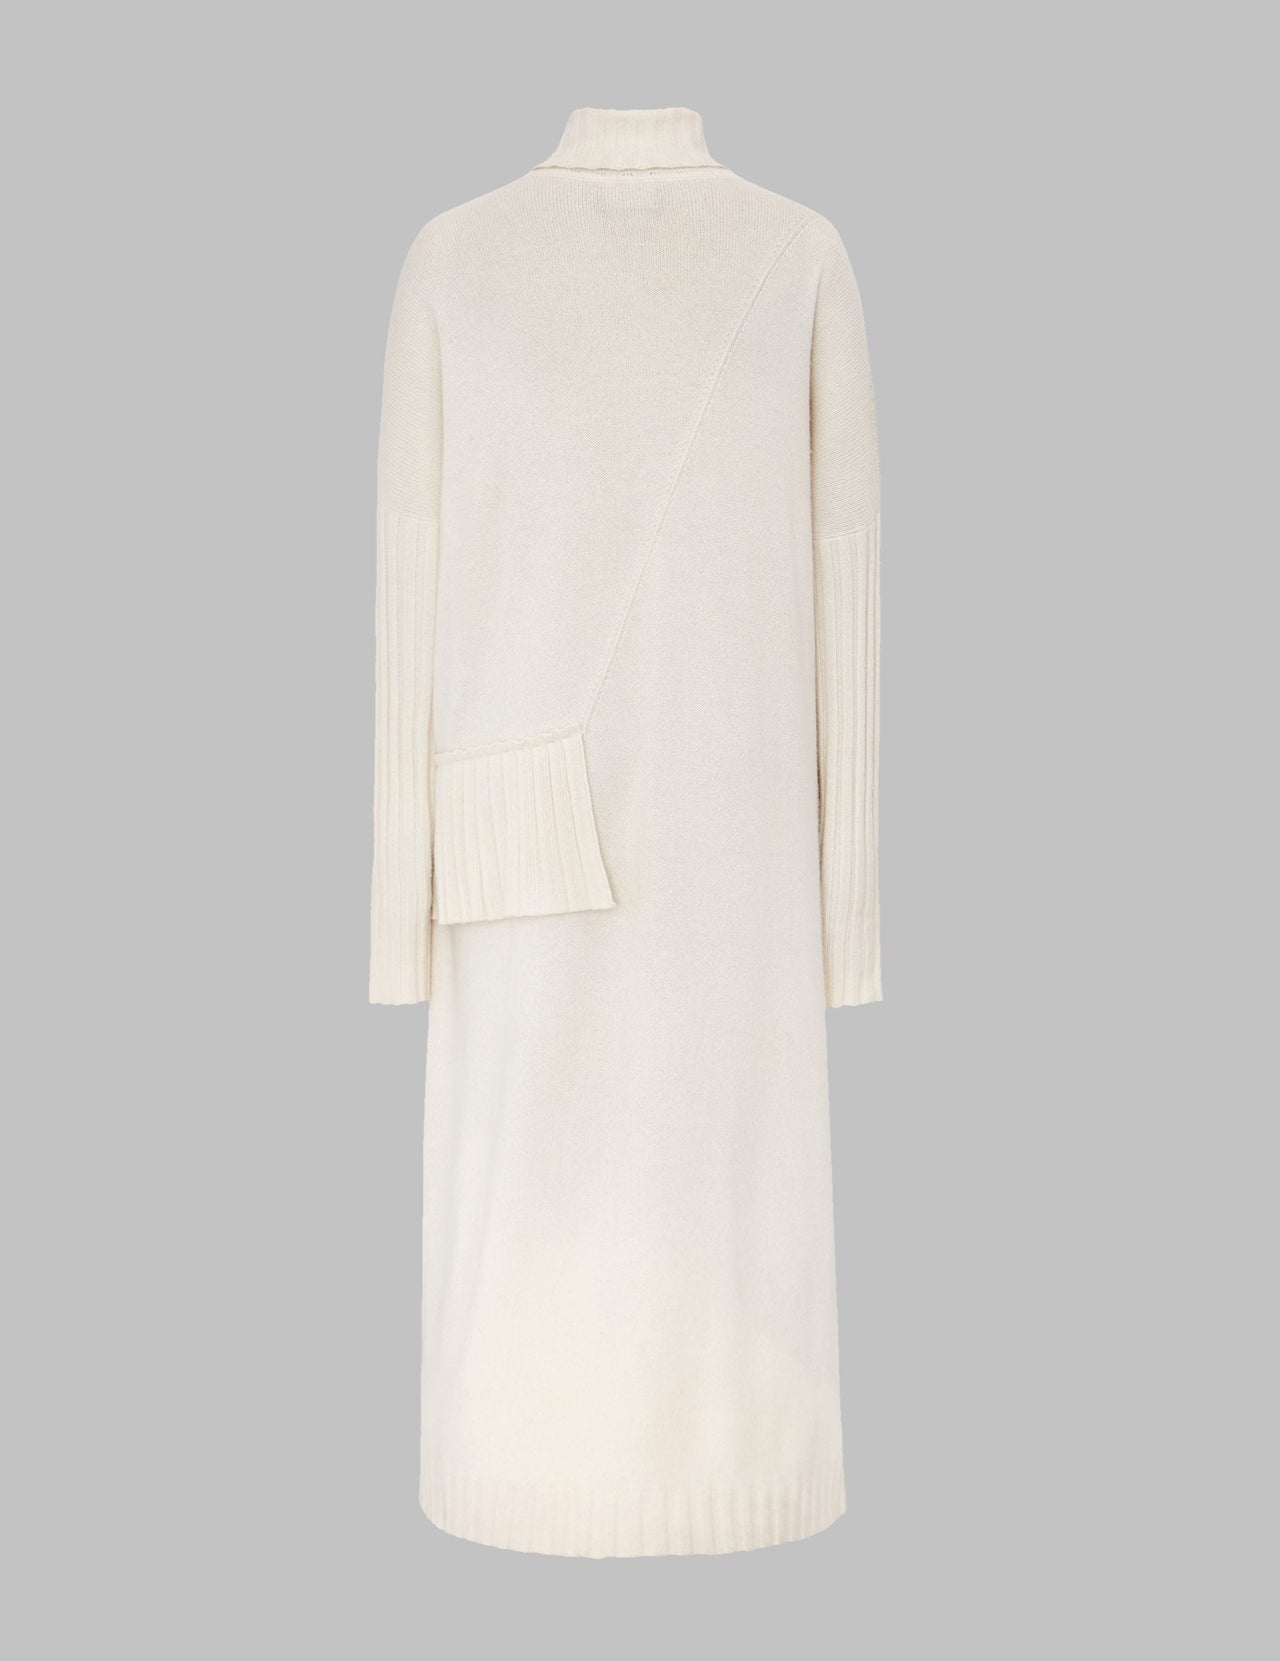  Chalk Roll Neck Pleated Cashmere Dress  